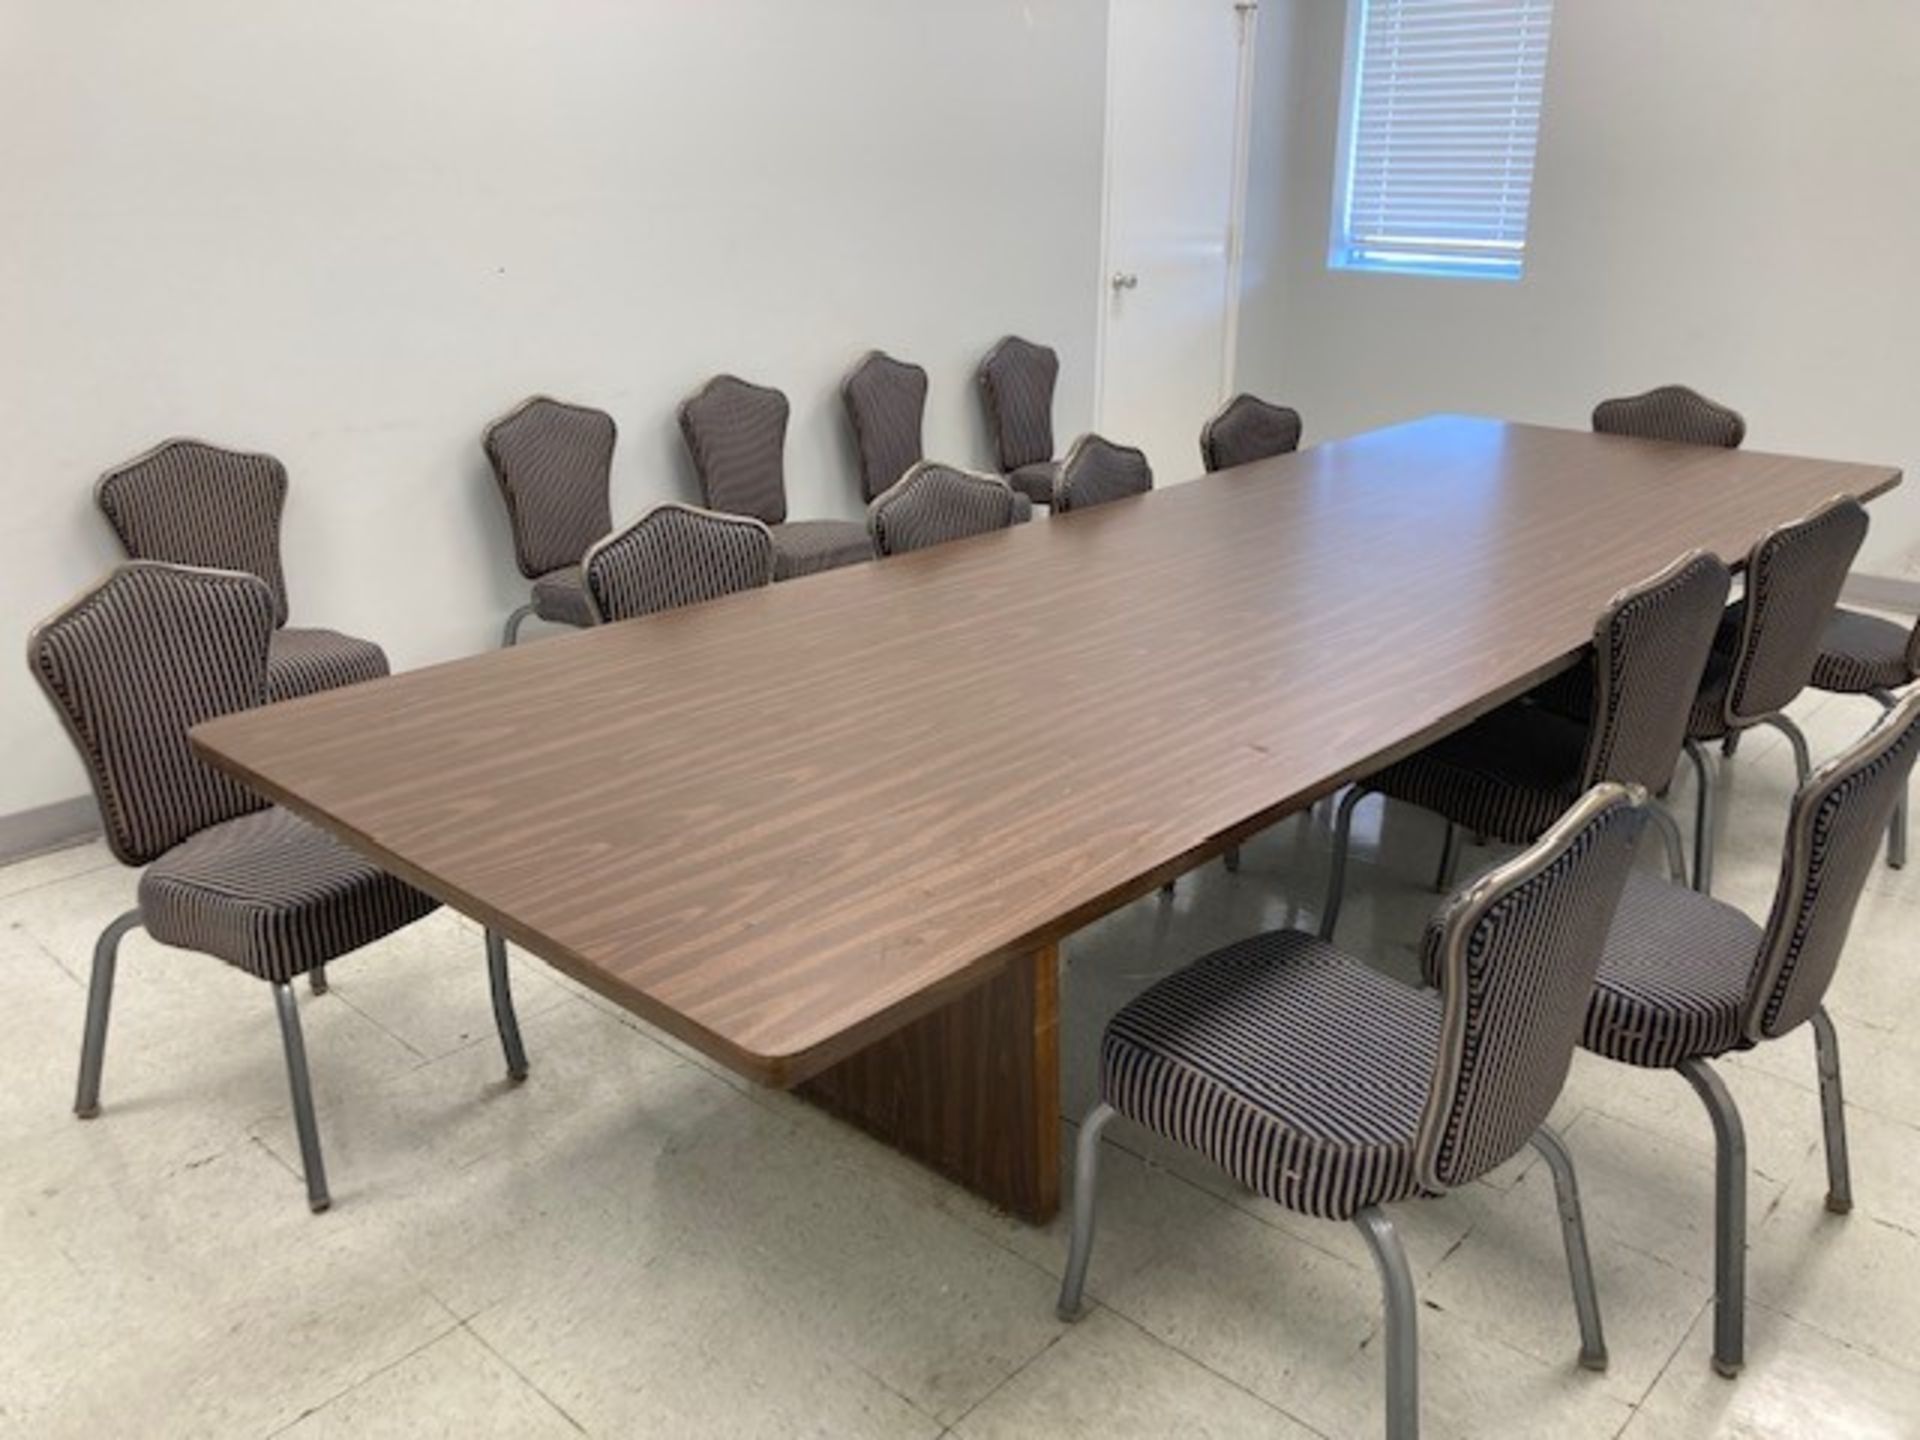 52" x 12' Conference Table with (17) Chairs - Image 2 of 2